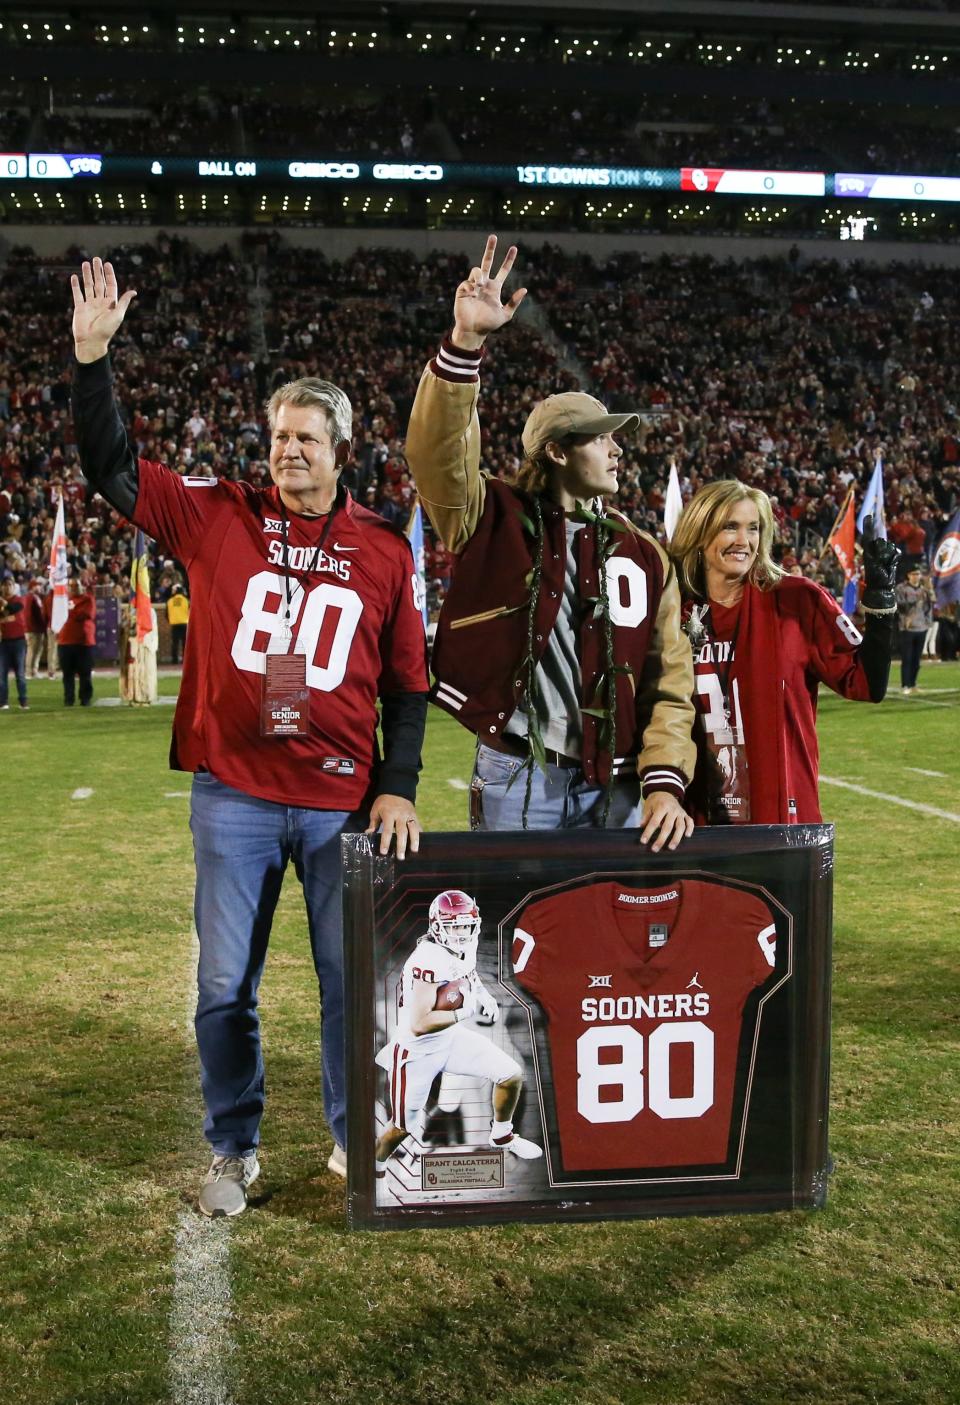 Grant Calcaterra (80) participated in Oklahoma's senior night in 2019 when he thought he was going to retire.